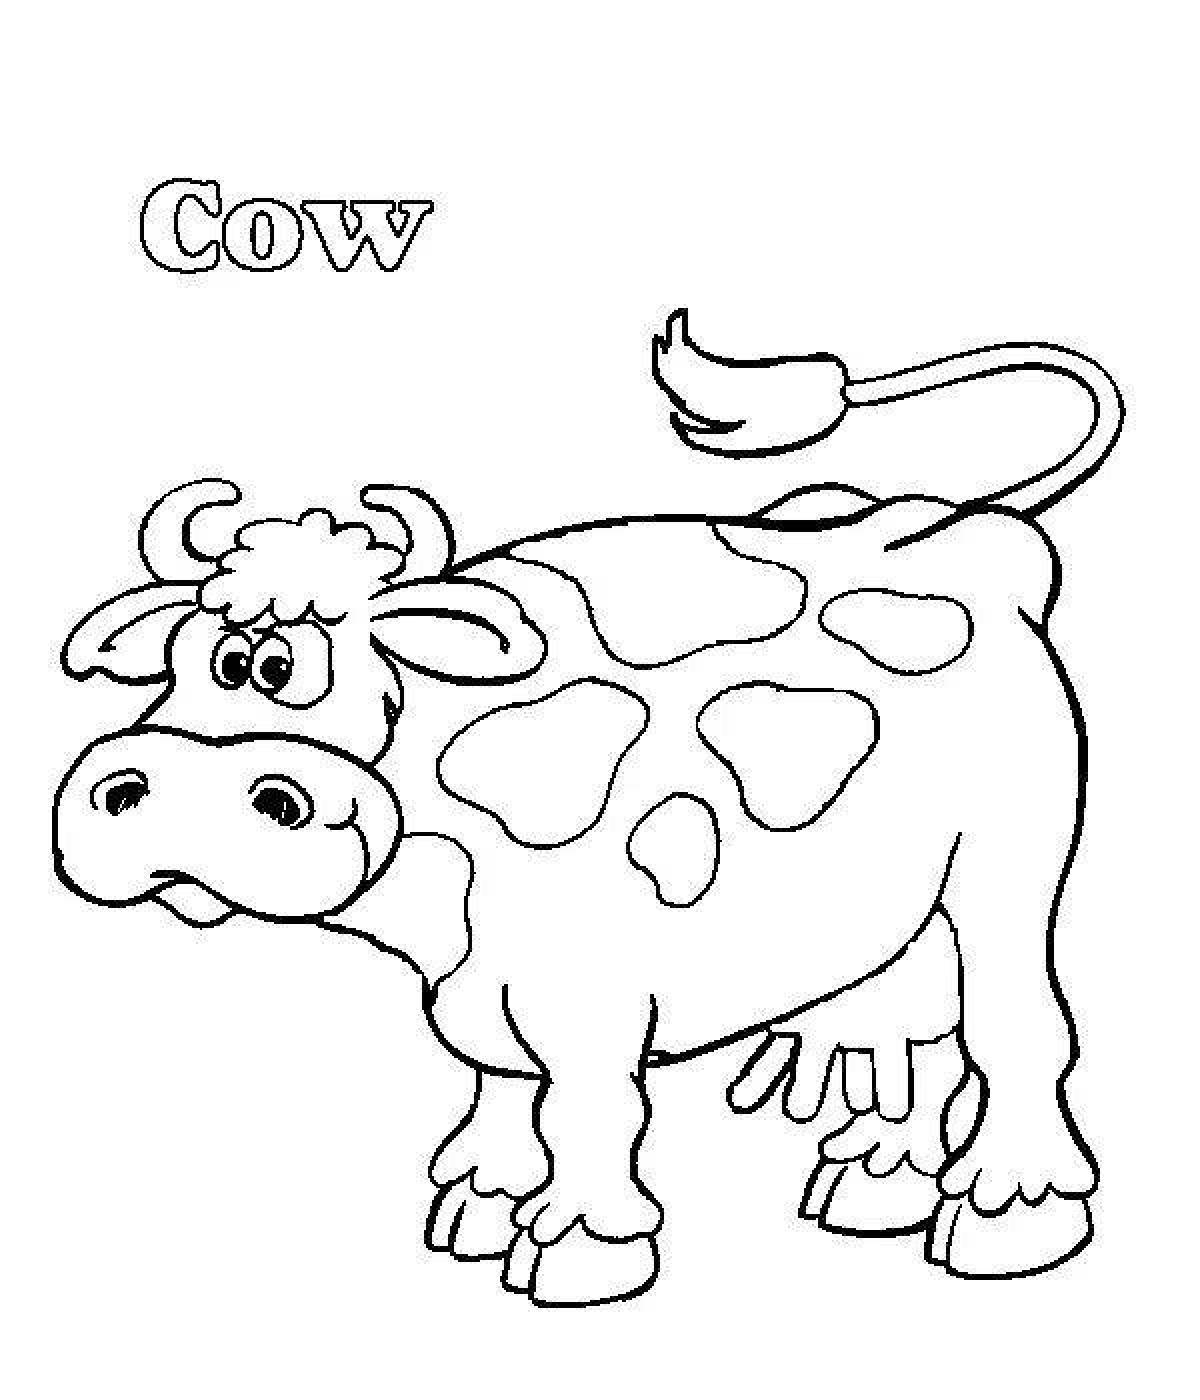 Cow for kids #2